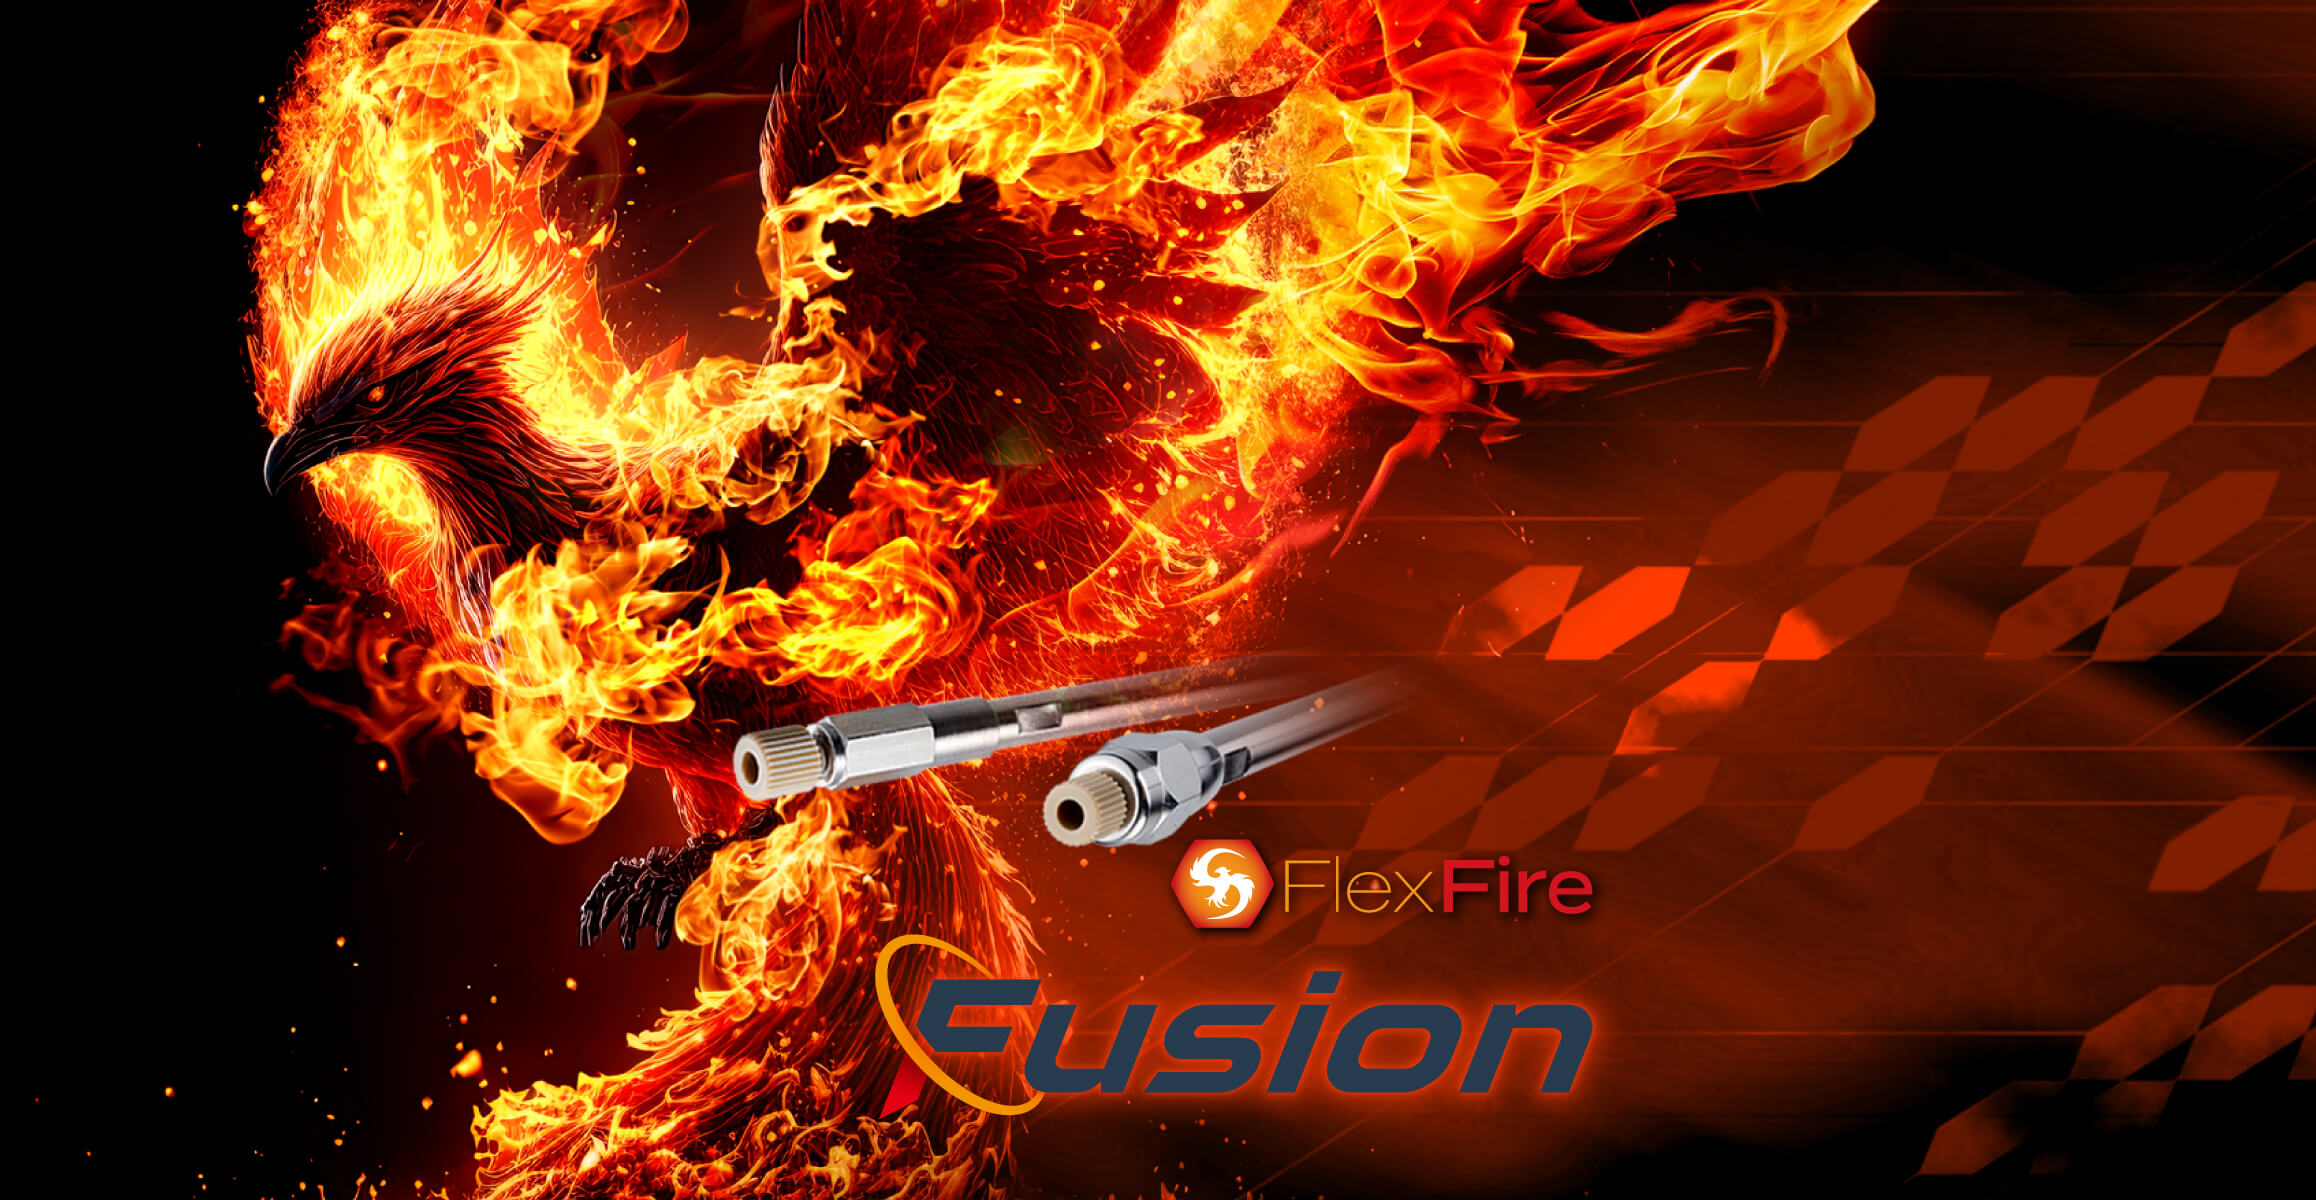 FlexFire Fusion series Fusion of the past and the present for the future